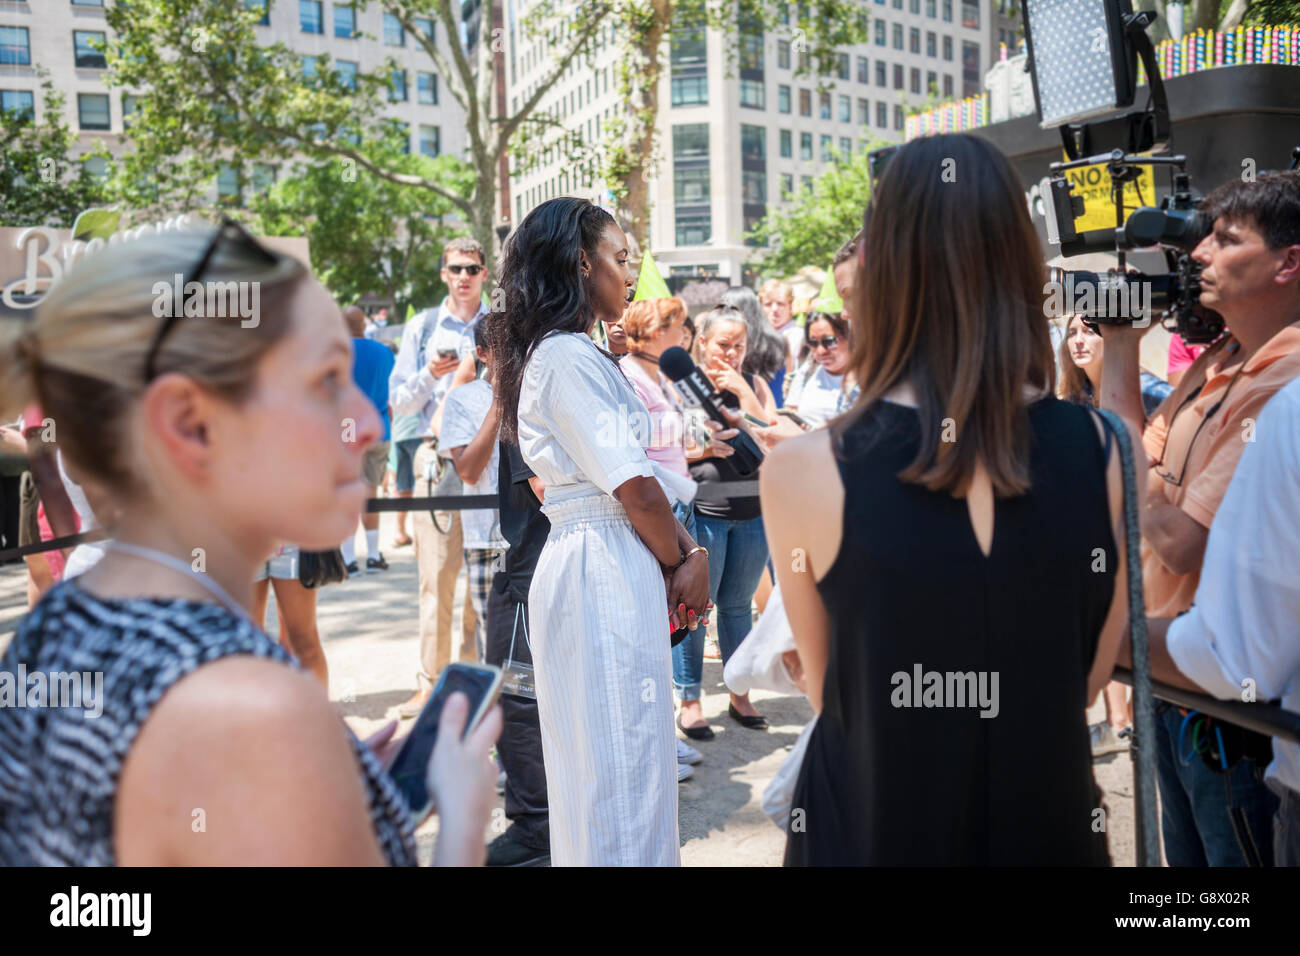 Actress/singer Kelly Rowland is interviewed in Madison Square Park in New York during the Breyers ice cream event on Wednesday, June 22, 2016. Breyers is giving away the summer treat as a celebration of the company's 150th anniversary. Besides the dessert visitors had the opportunity to meet various celebrities that Breyers had brought in. Breyers is a brand of the giant conglomerate Unilever. (© Richard B. Levine) Stock Photo